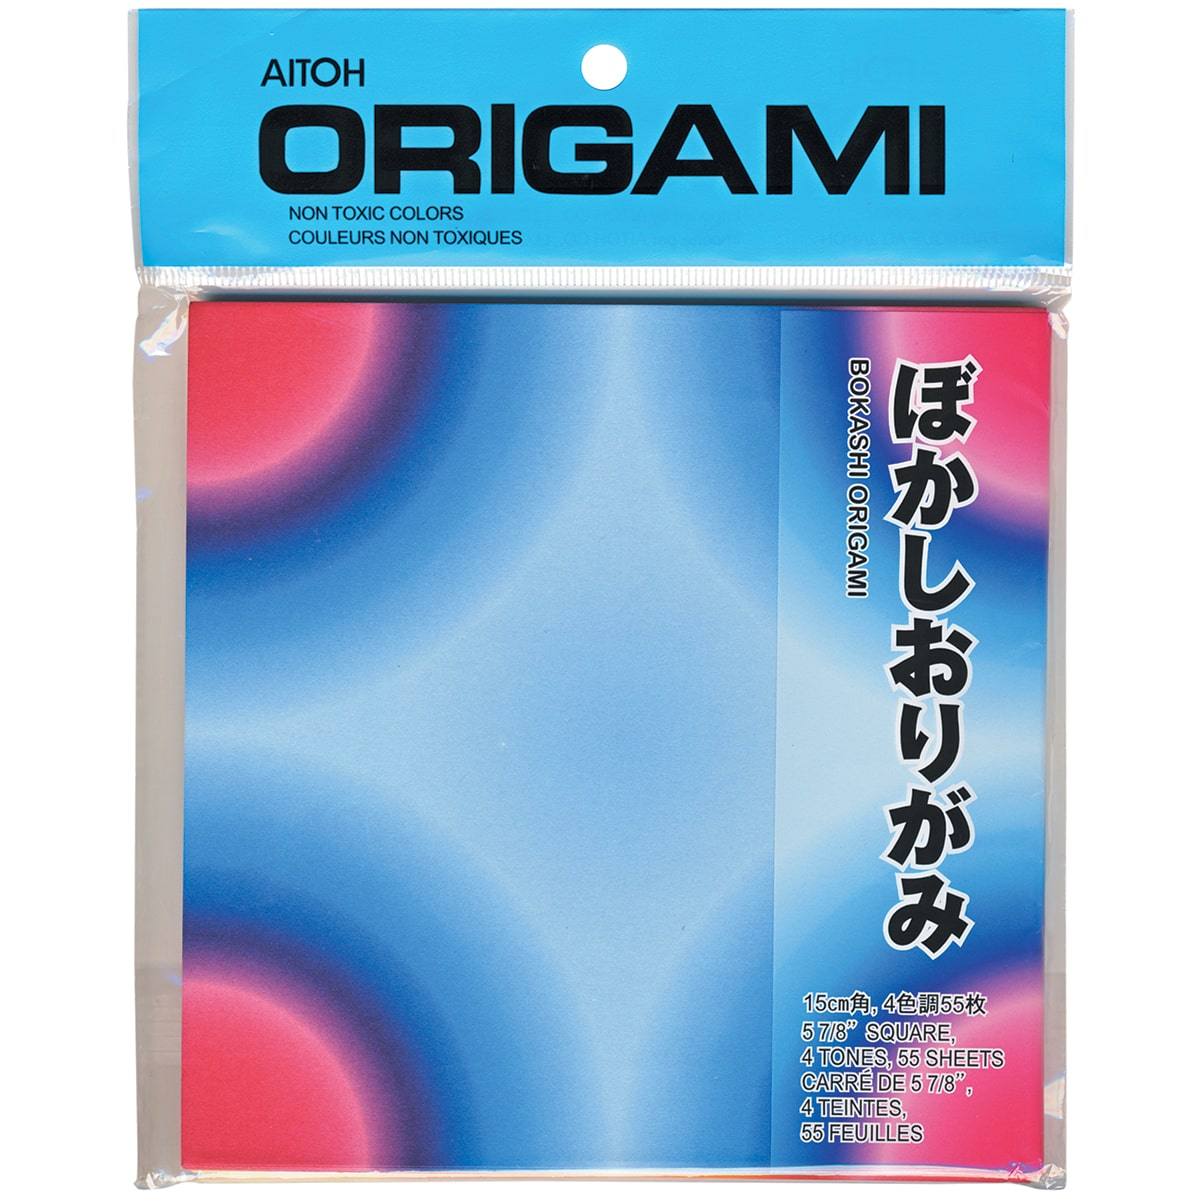 Harmony Origami Paper Aitoh Harmony Origami Paper 5875 5875 Inch 55 Pack Multi Colored